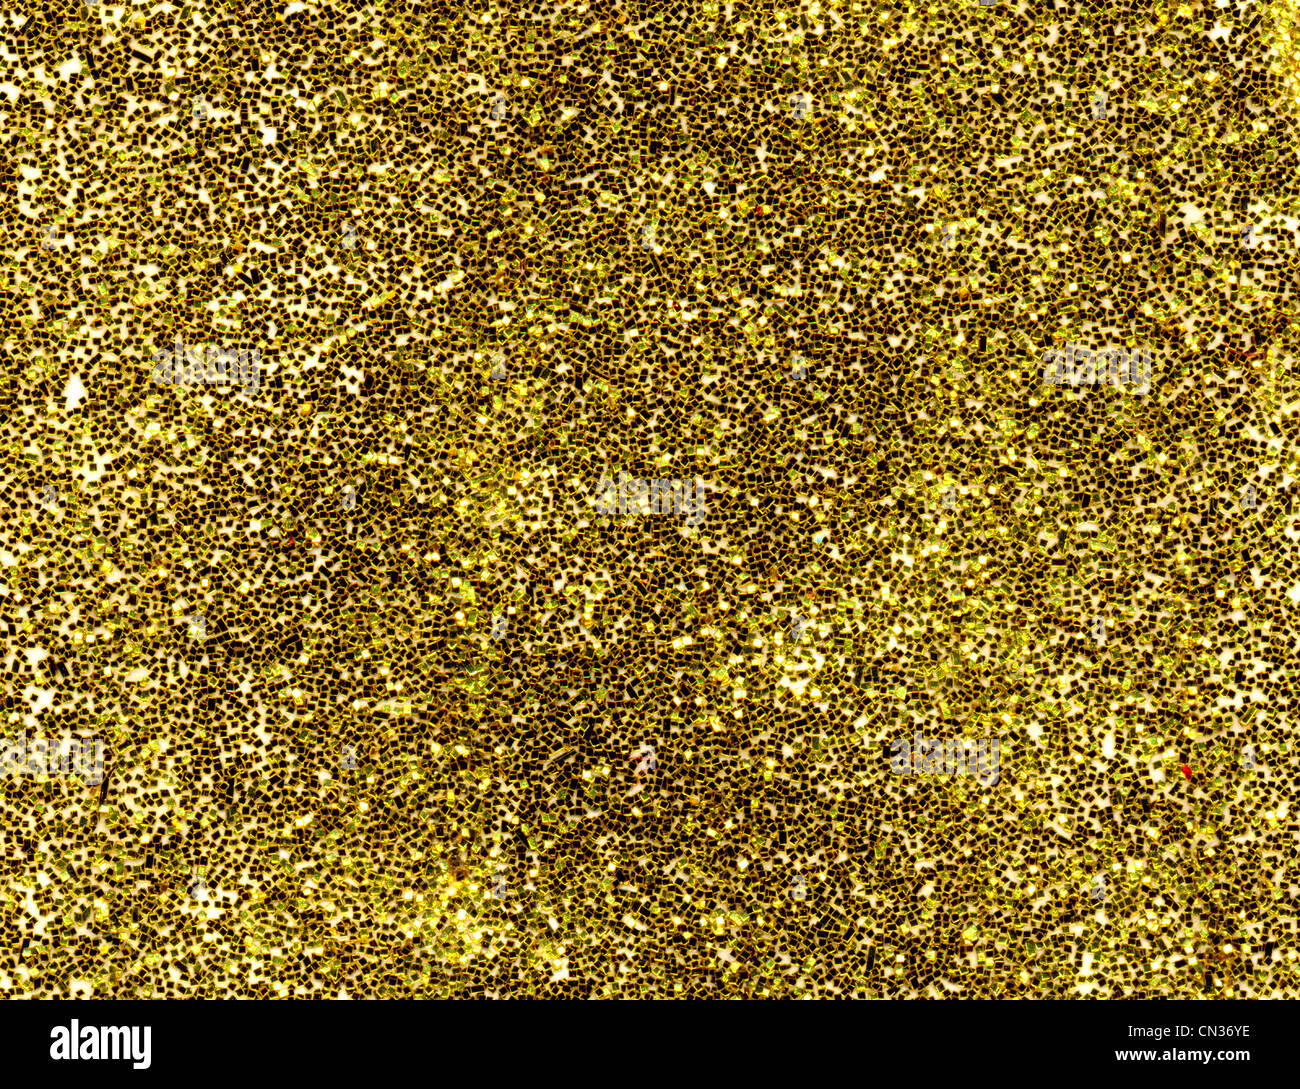 Gold glitter background texture macro close up. Banque D'Images